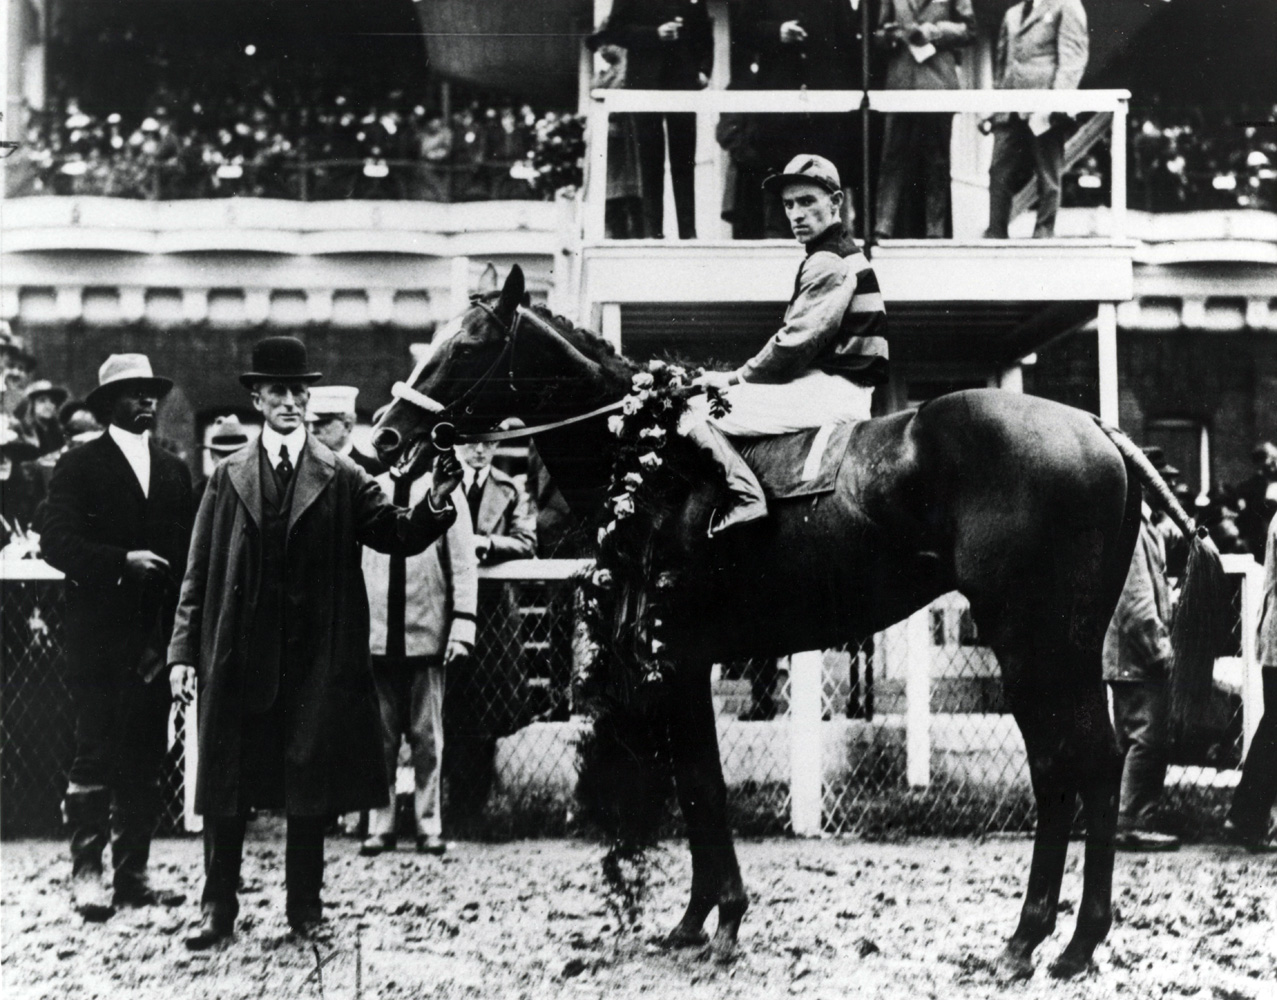 John Loftus and Sir Barton in the winner's circle for the 1919 Kentucky Derby (Churchill Downs Inc./Kinetic Corp. /Museum Collection)